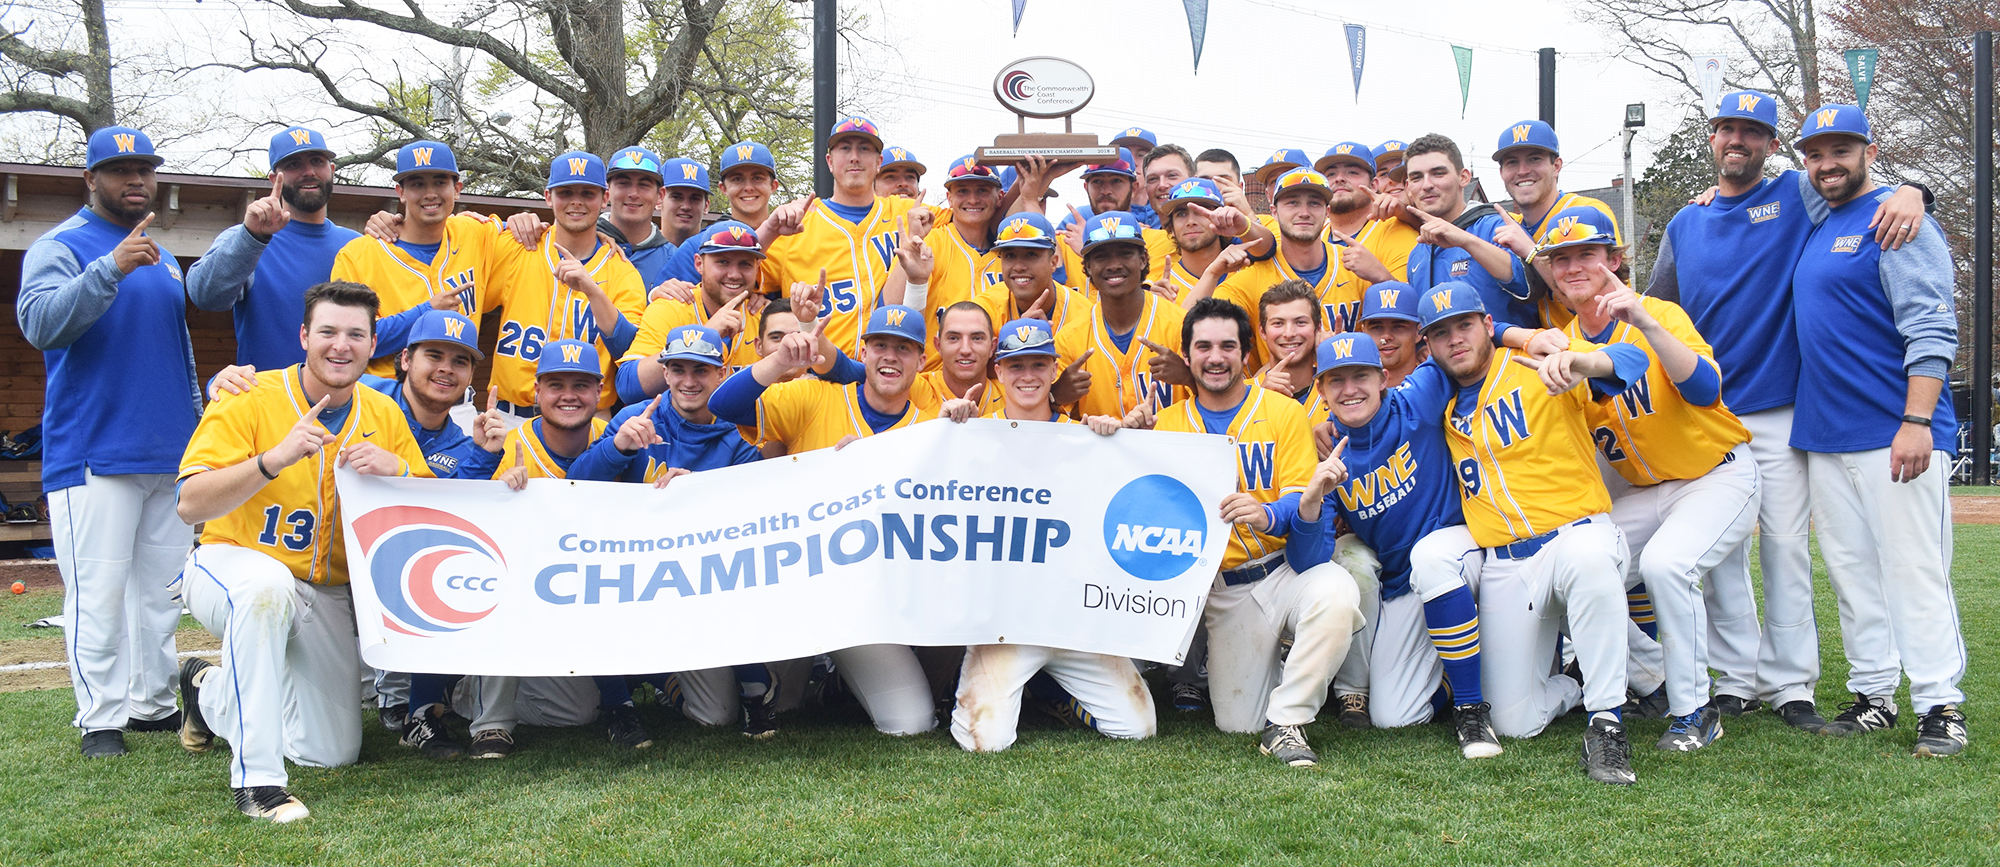 Western New England captured its sixth CCC title and first since 2012 with a 7-6, walkoff victory over Salve Regina on Sunday at Reynolds Field in Newport, R.I. (Photo by Jim Balderston)